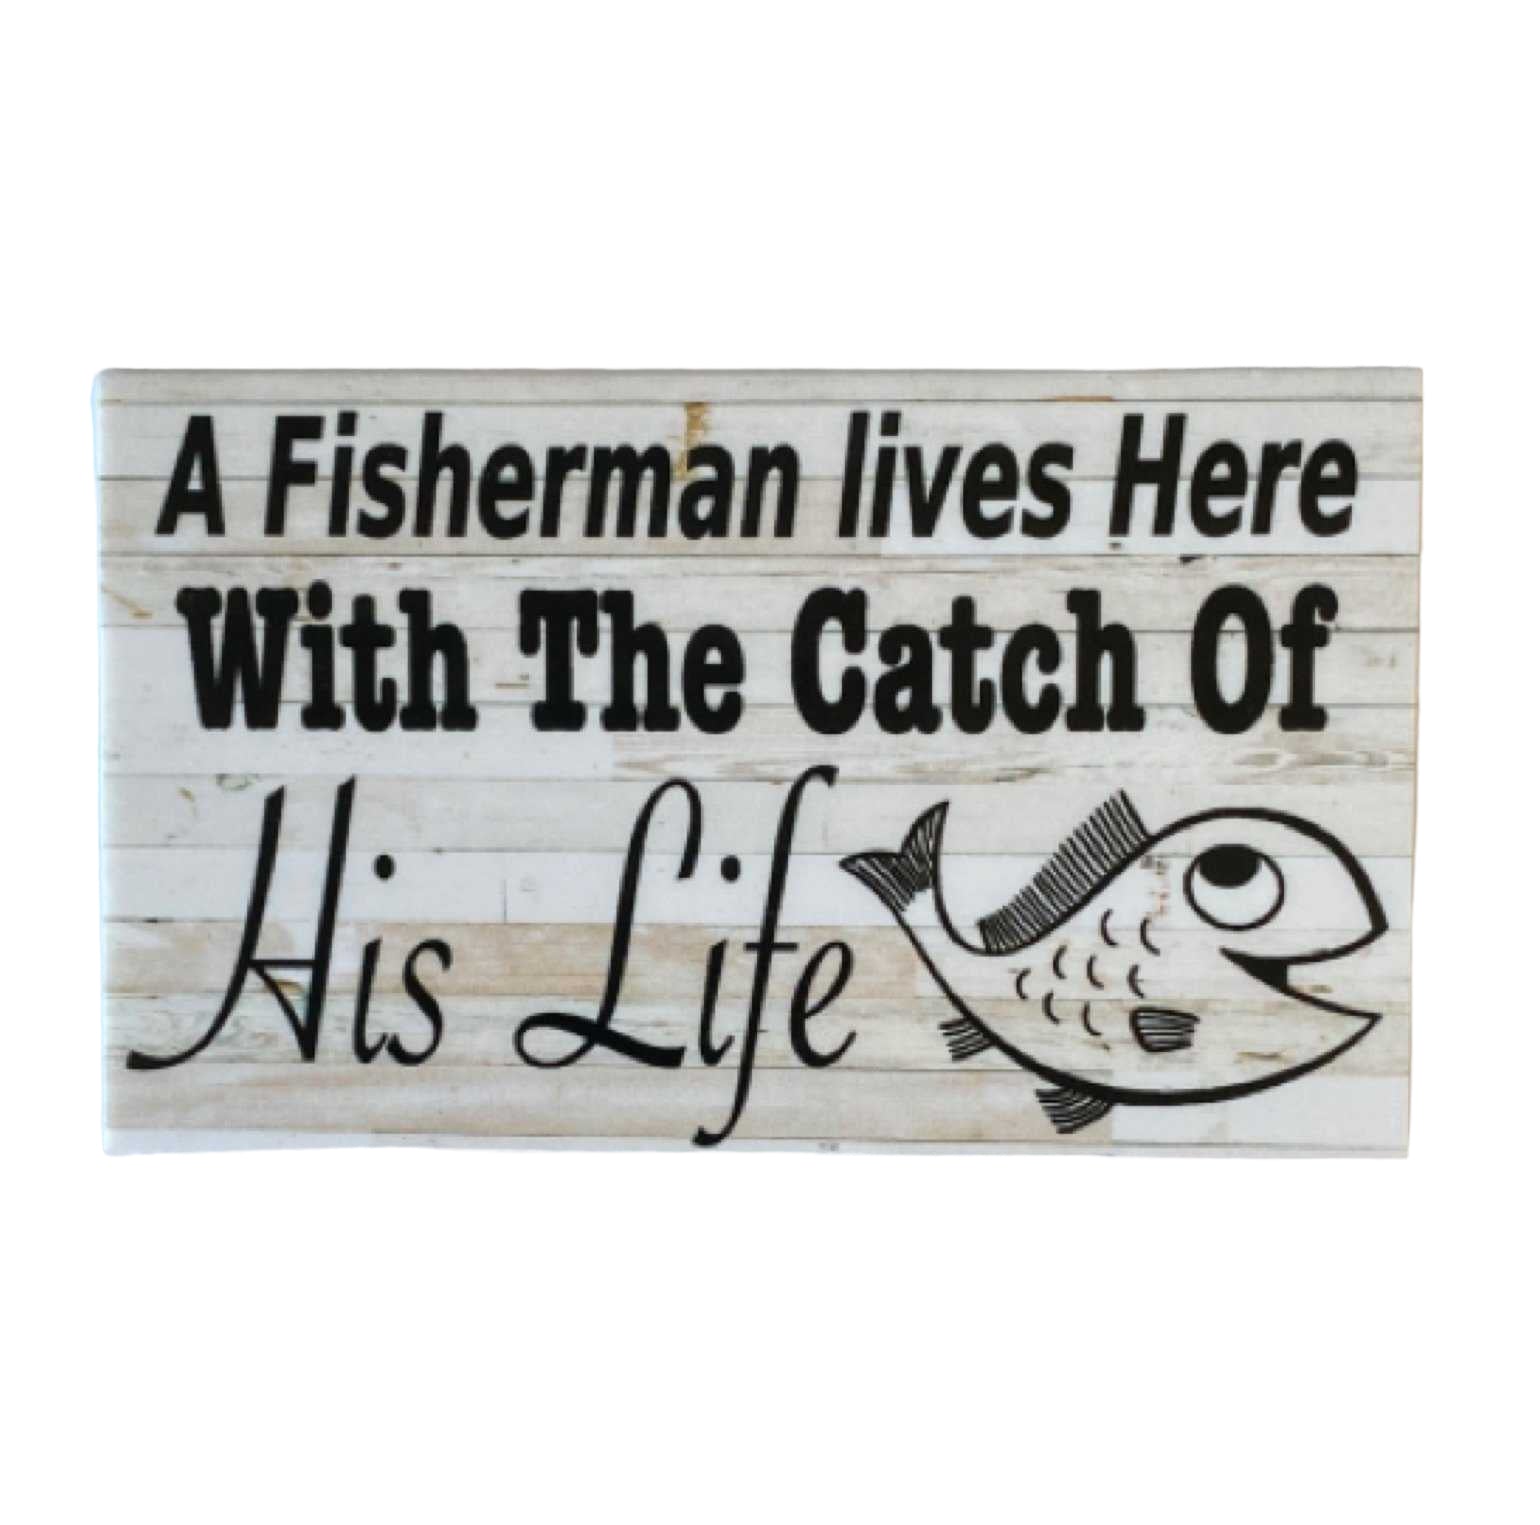 Fisherman Lives Here With Catch Of His Life Rustic Sign - The Renmy Store Homewares & Gifts 